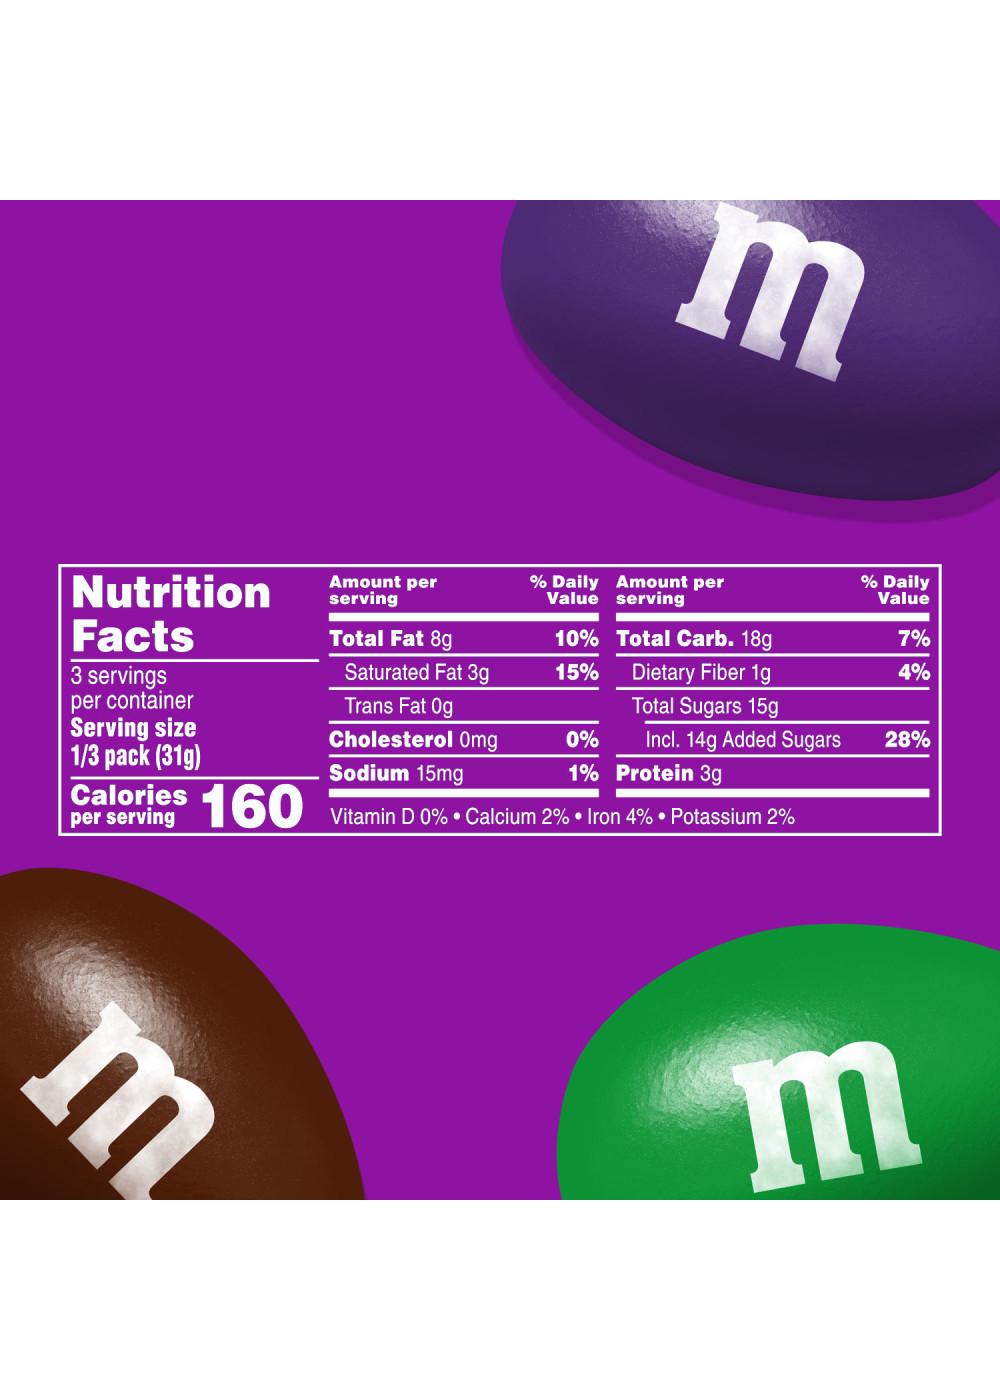 M&M's Limited Edition Peanut Chocolate Candy Featuring Purple Candy, Share  Size, 3.27 Oz Bag